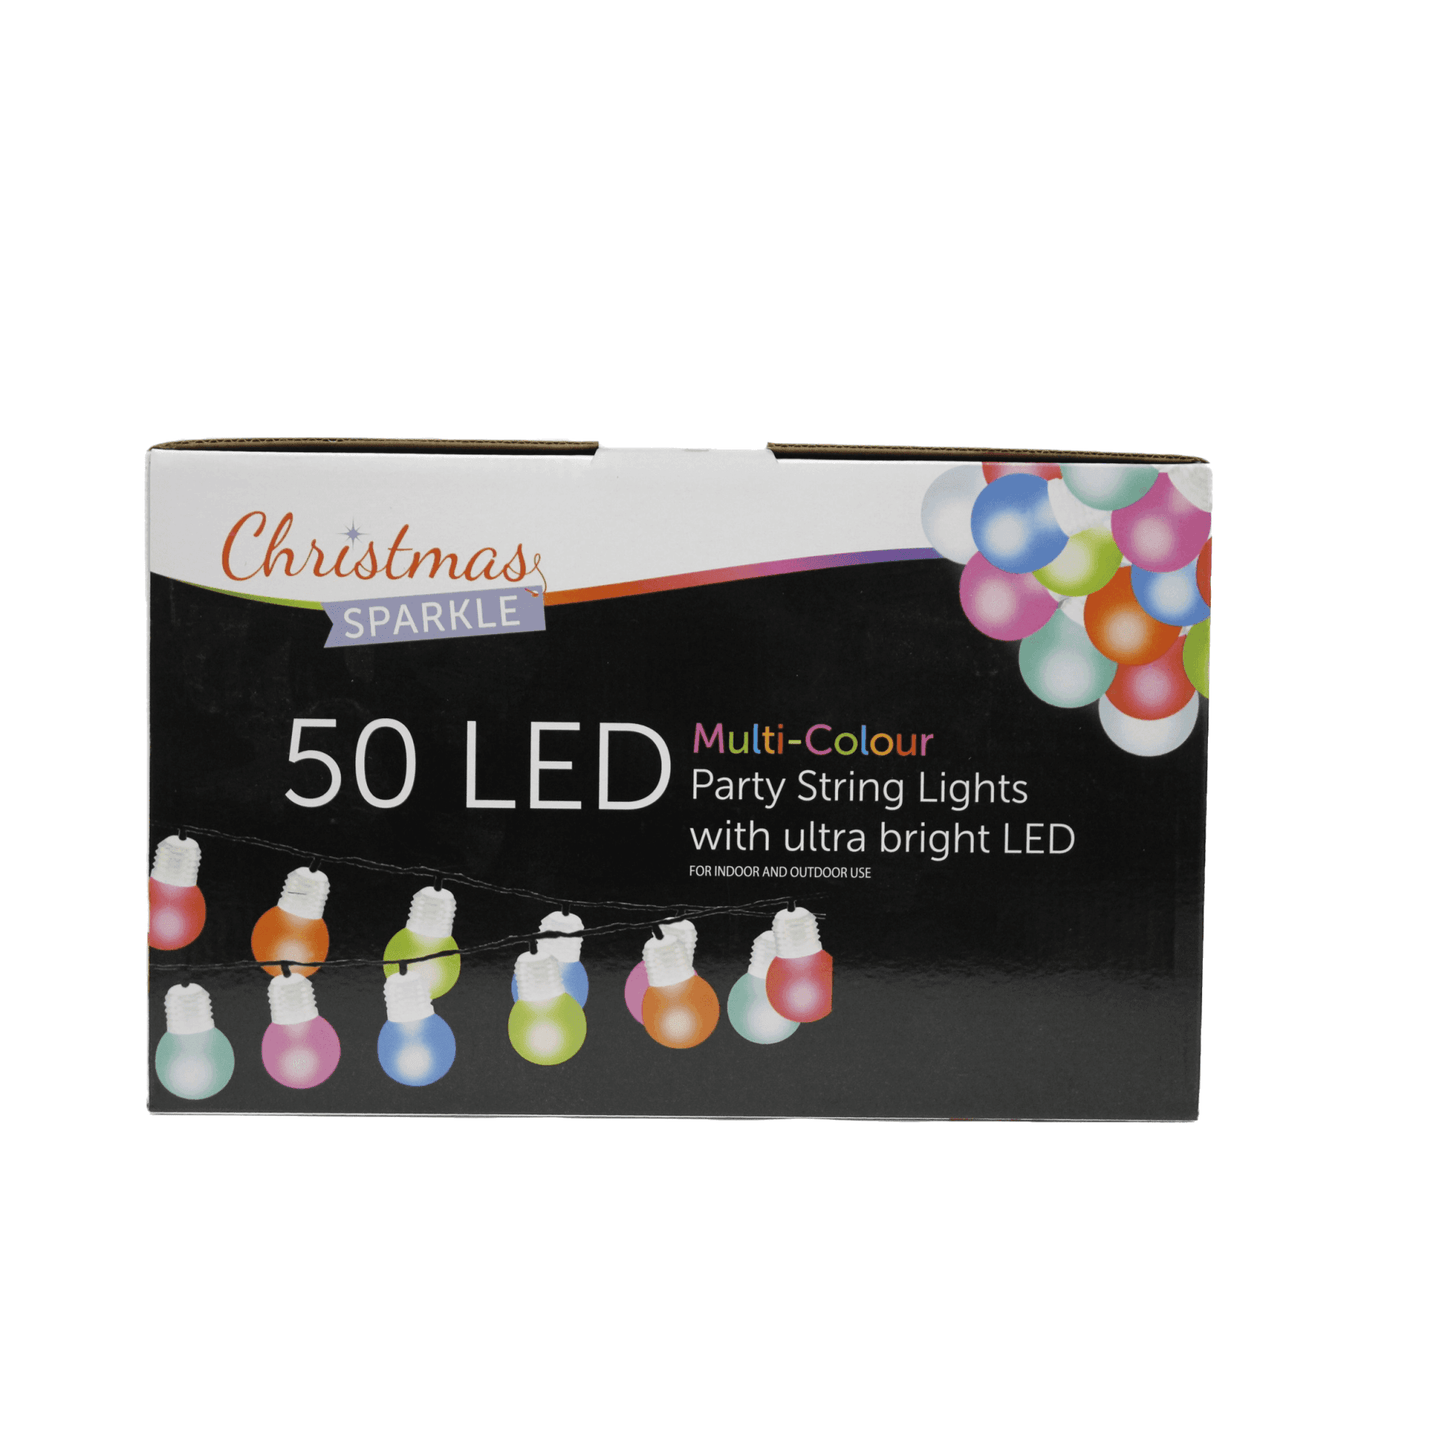 Christmas Sparkle Outdoor and Indoor Party String Bulbs with 50 Ultra bright LEDS in Multi Colour with Green Cable